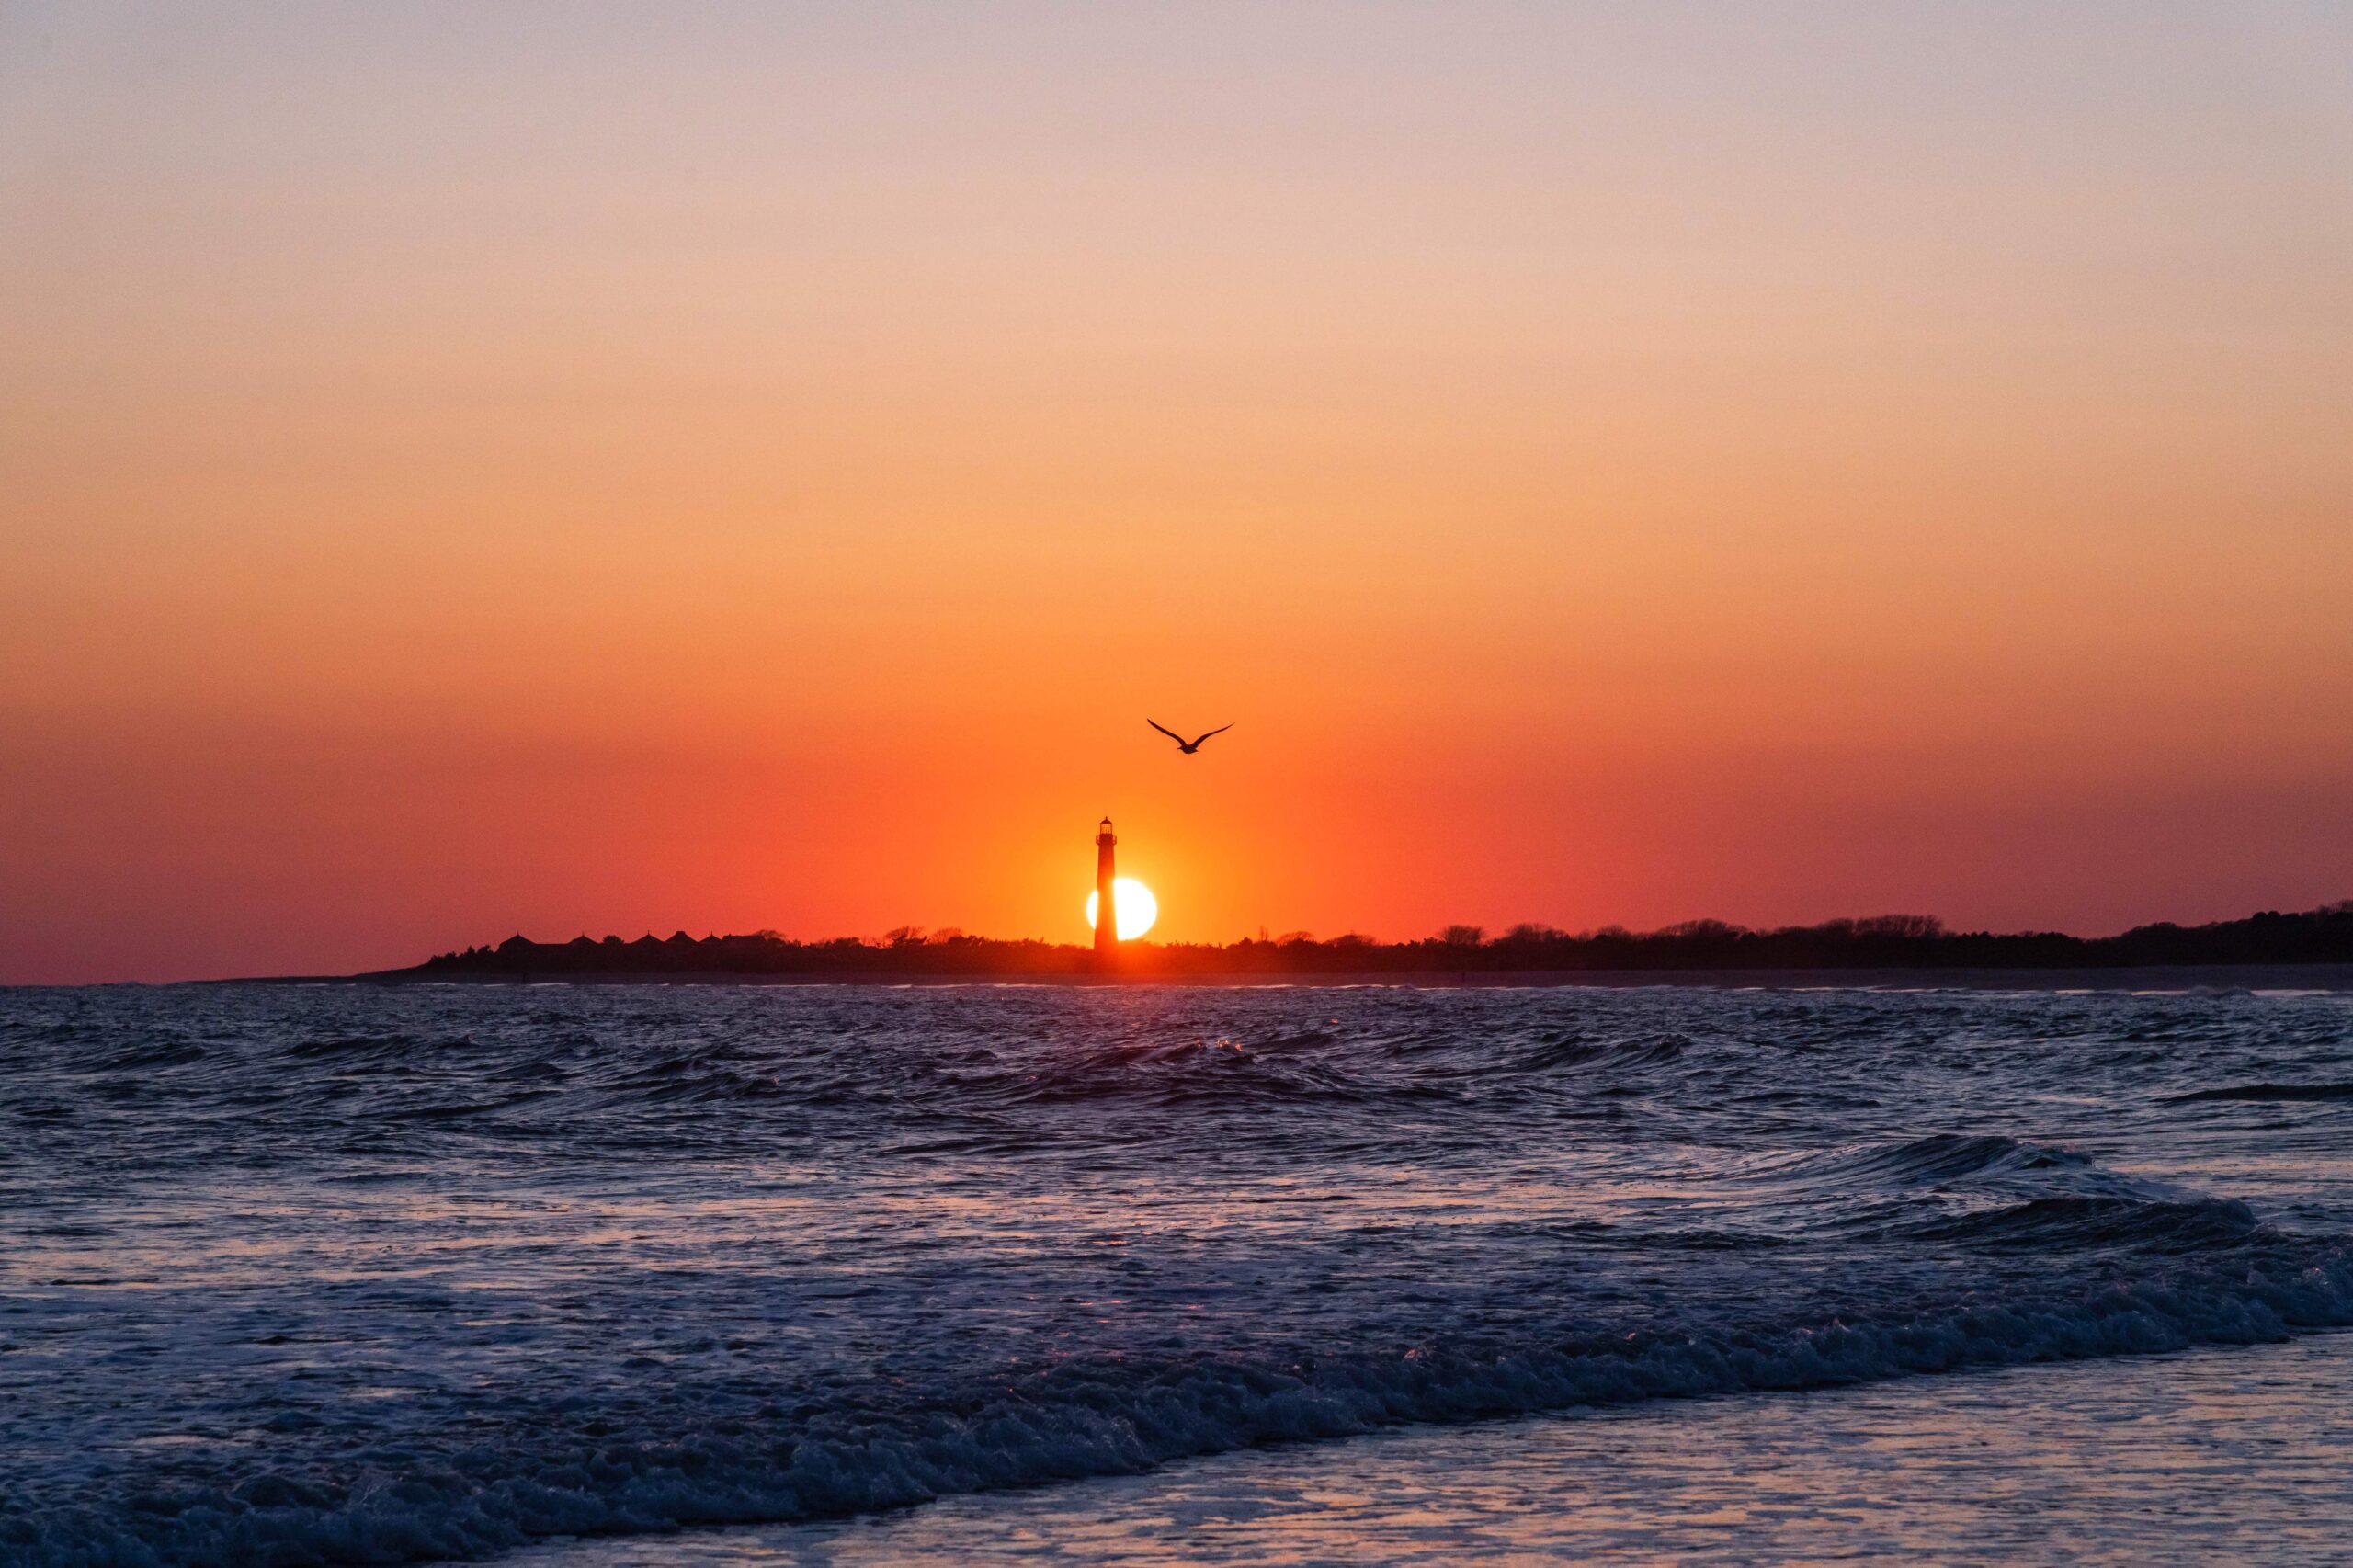 The sun setting directly behind the Cape May Lighthouse with a seagull flying by and a clear pink and orange sky